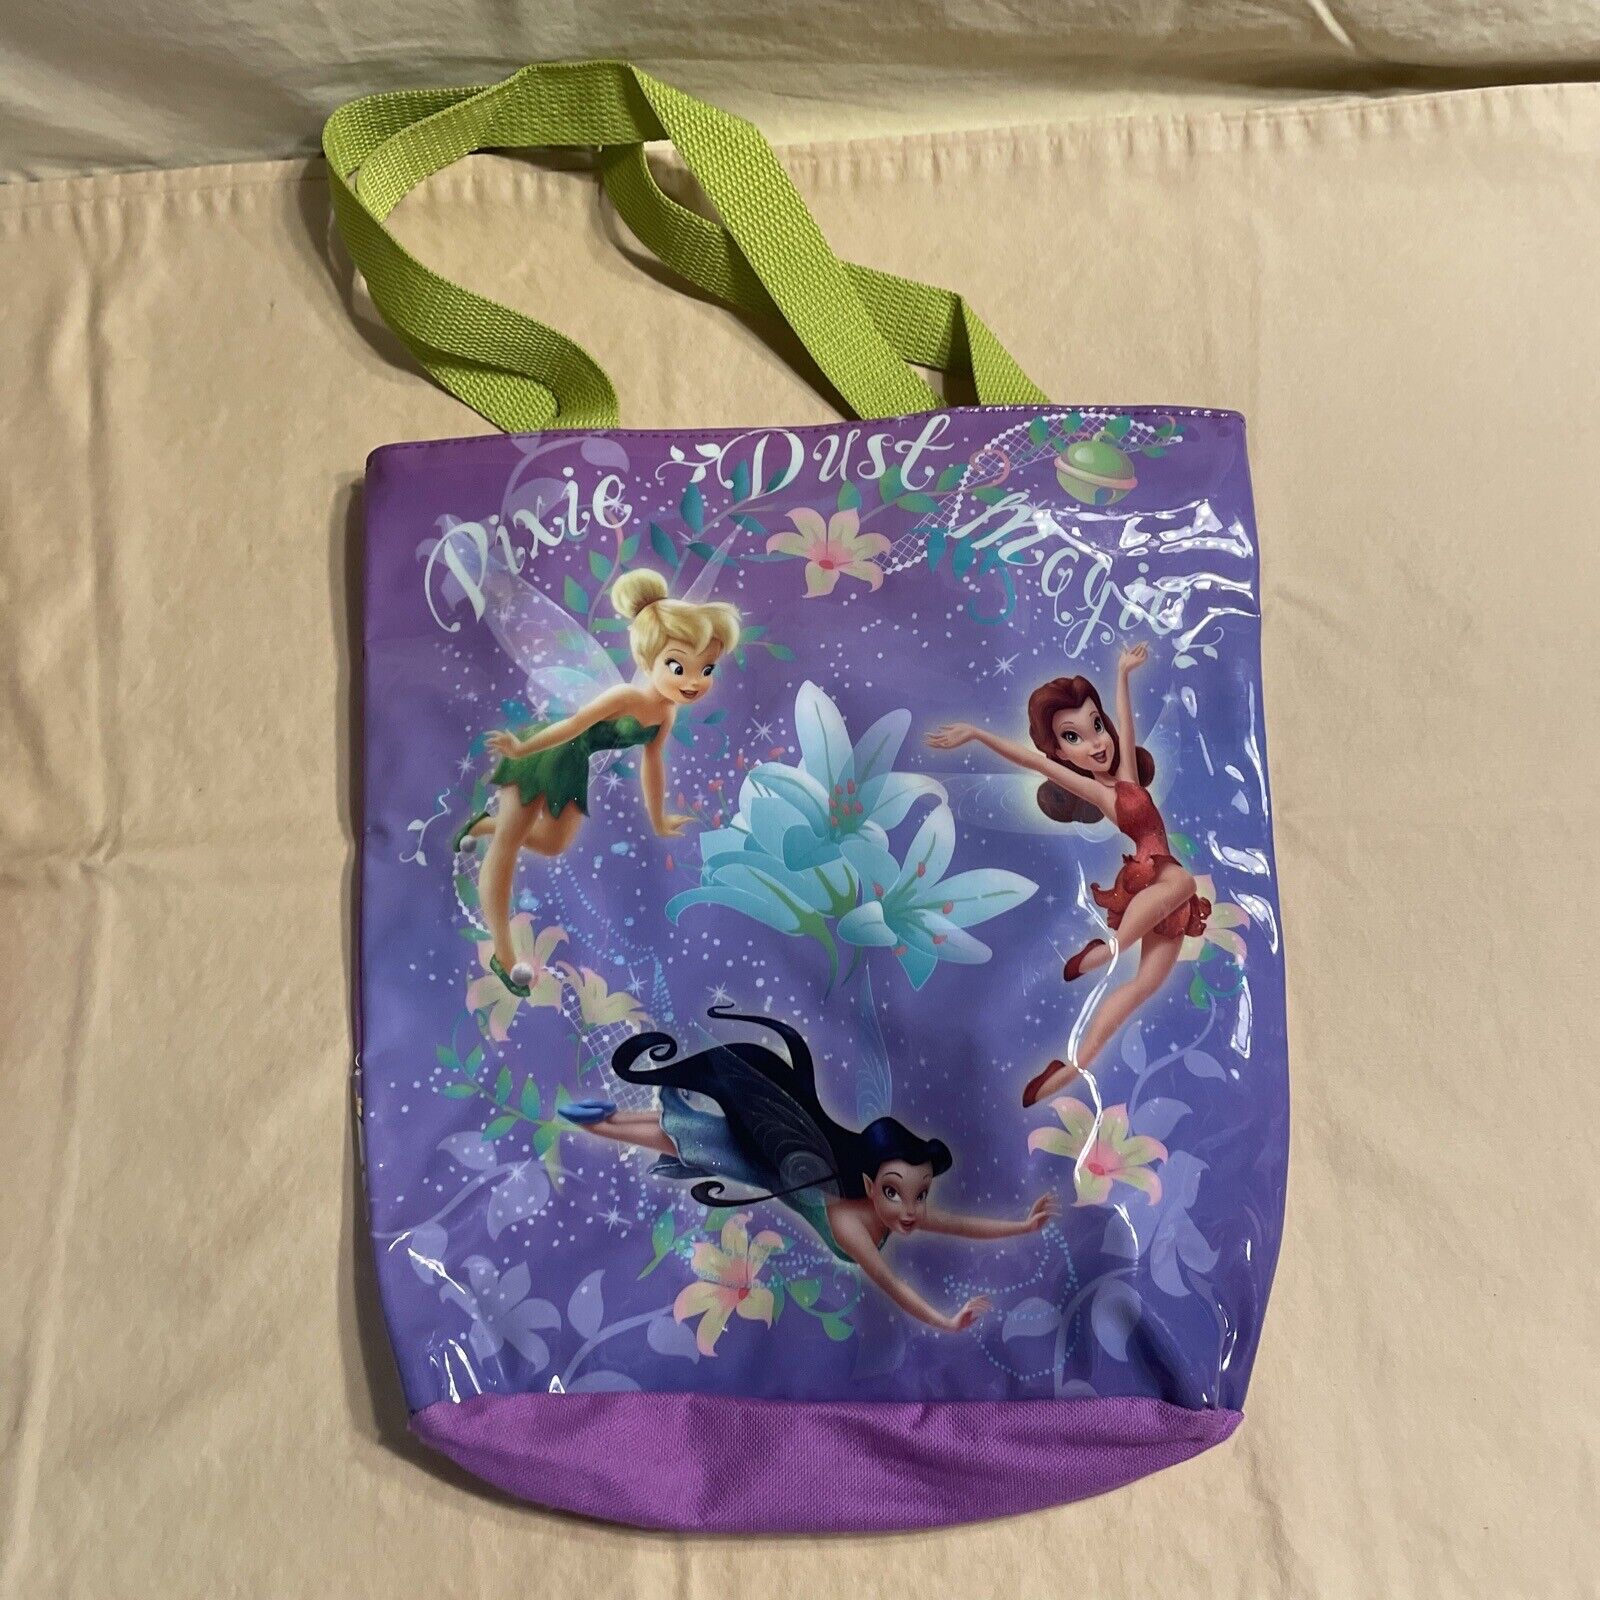 Disney Fairies Tinkerbell Canvas And Plastic Kid’s Tote Hand Bag Purple Green 